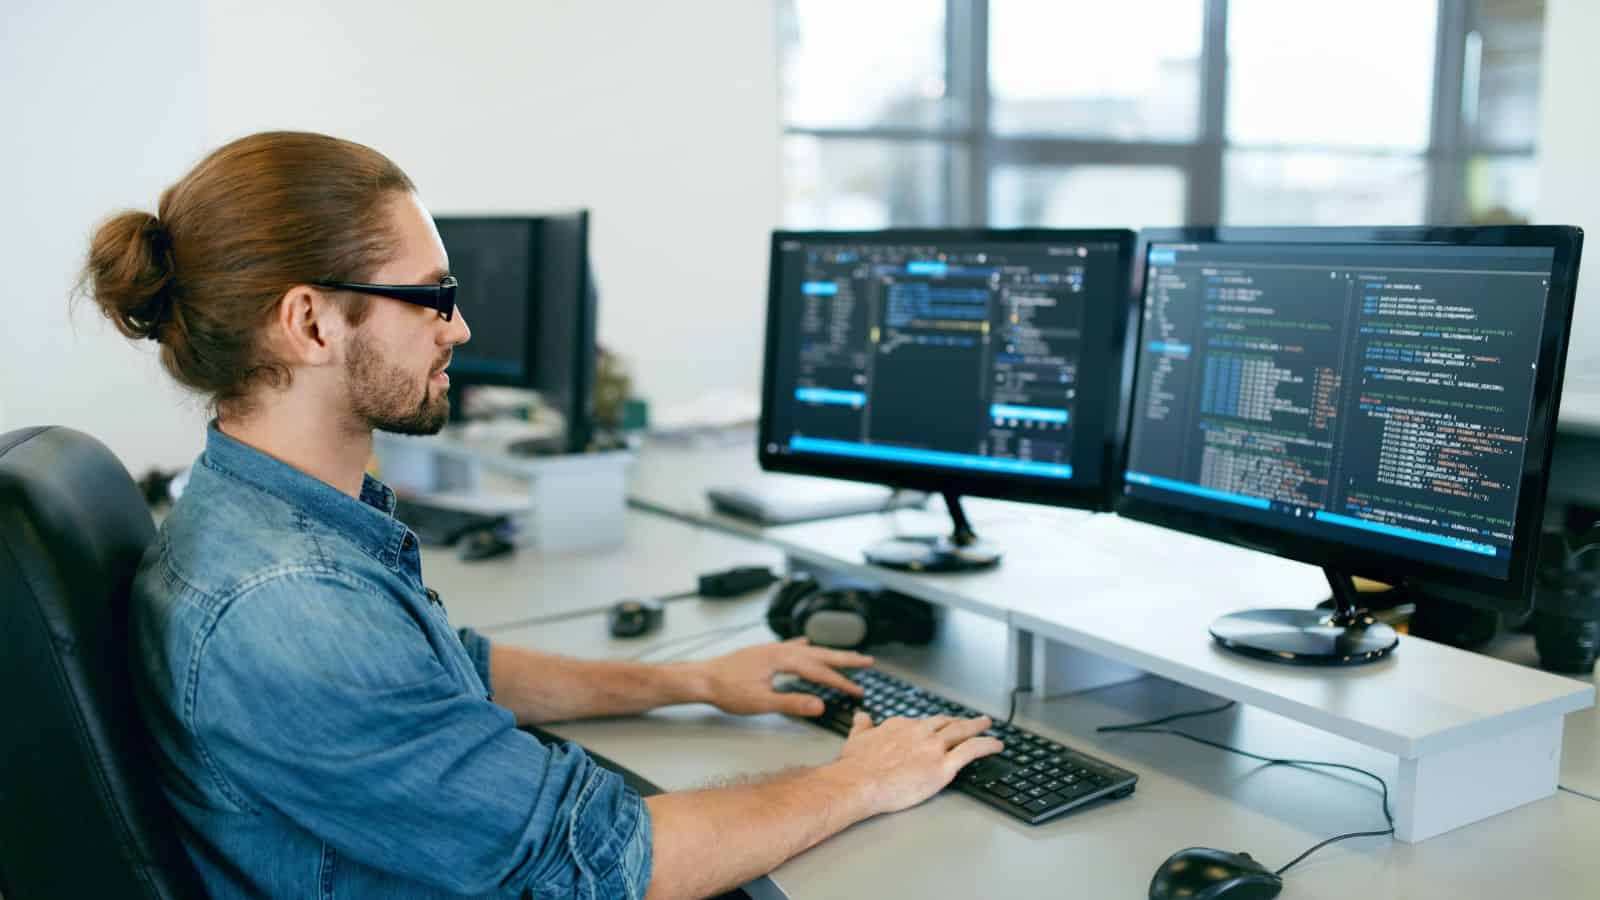 <p>With advancements in AI and machine learning, the role of the computer programmer is evolving. Routine programming tasks are increasingly automated, shifting the focus to more complex and creative aspects of software development. This evolution could change the nature of programming jobs significantly.</p>